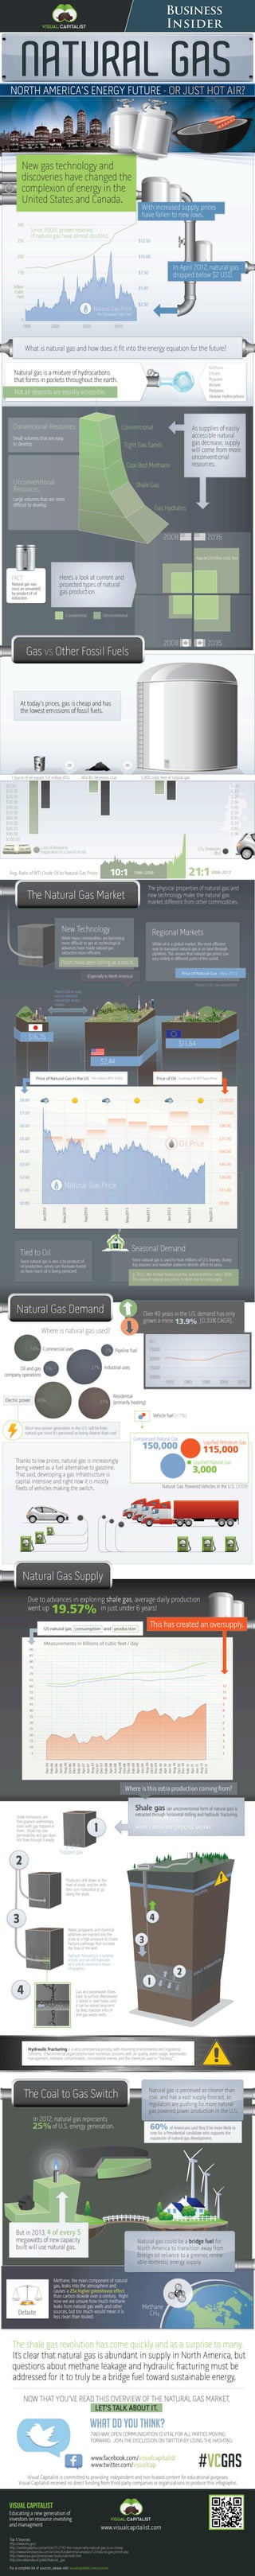 North America's Thirst for Natural Gas - Visual Capitalist 